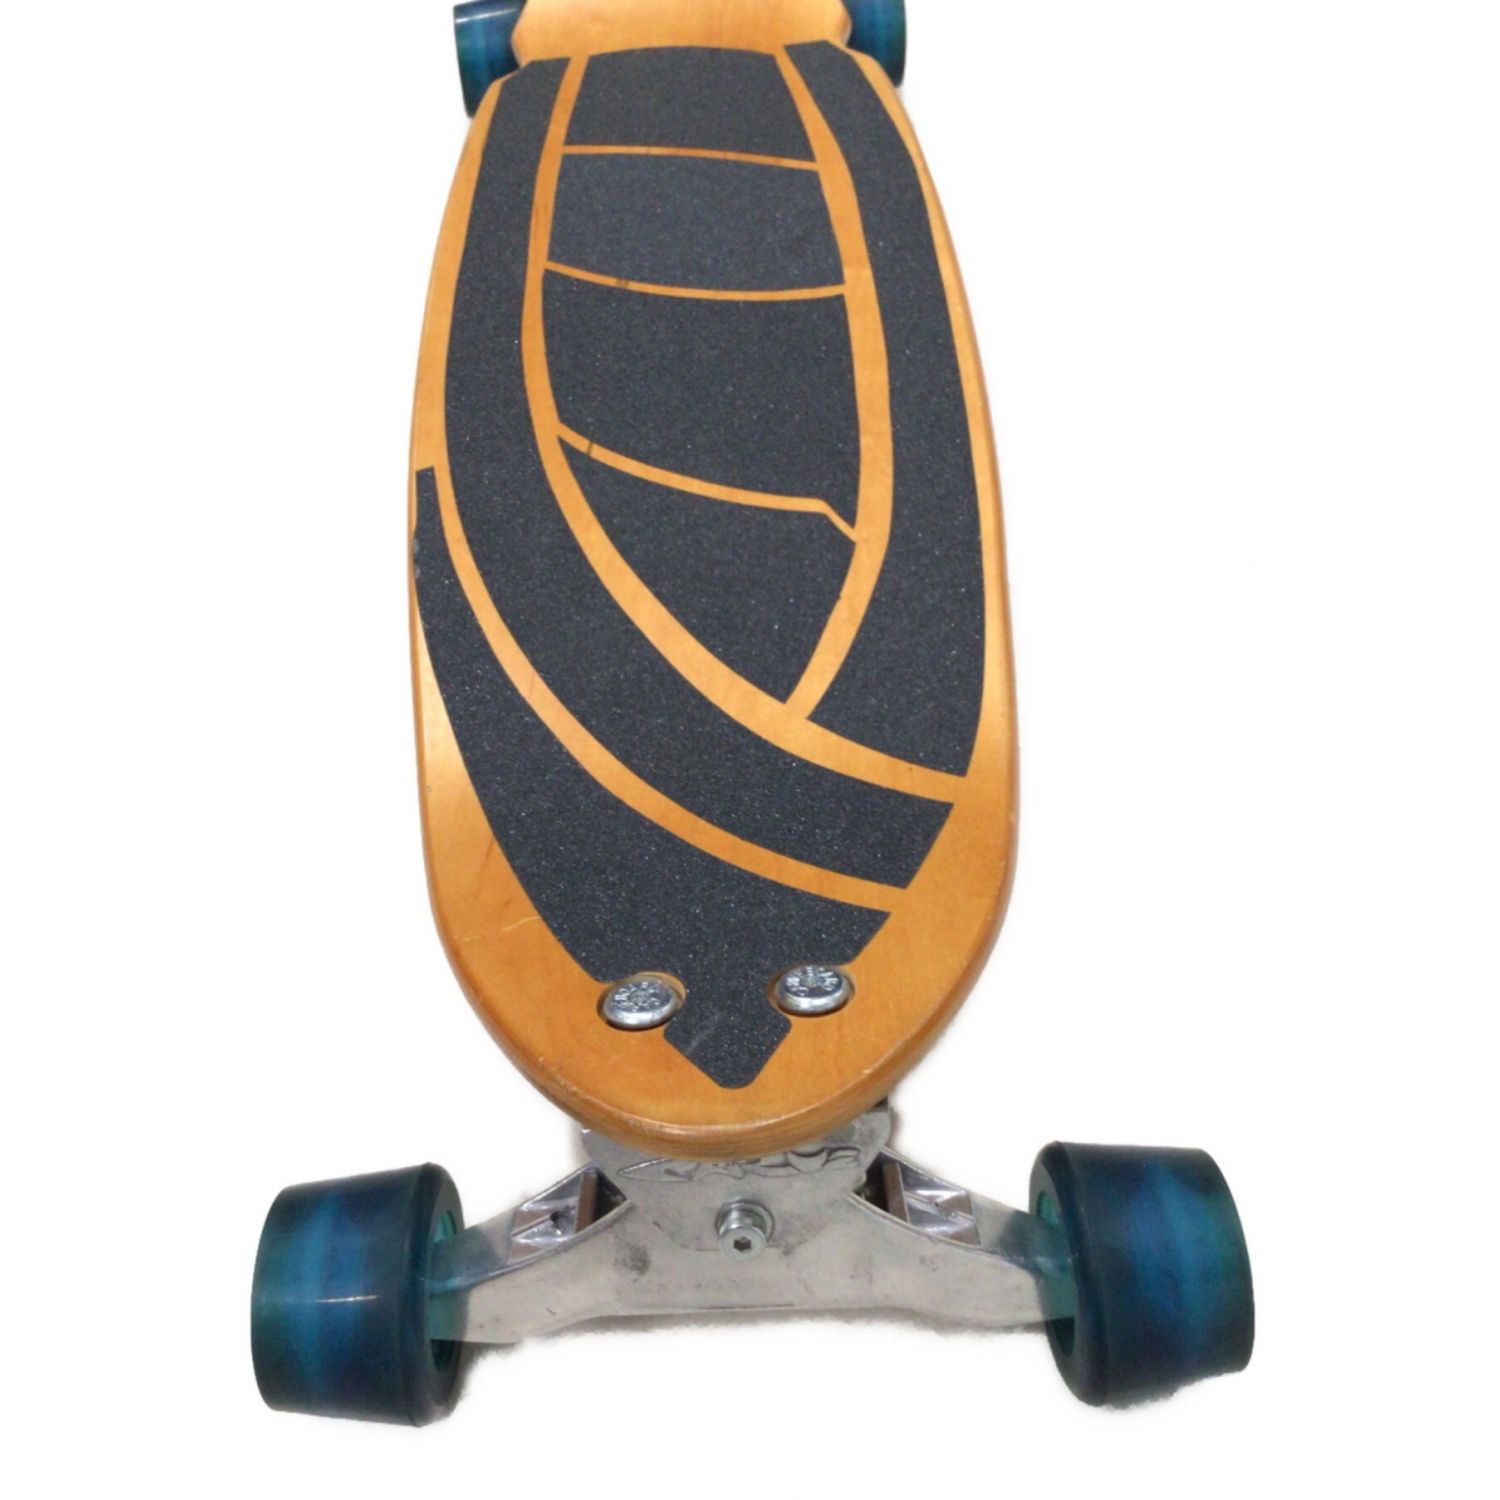 Carveboard SURFSTIK カーブスティック 即発送 - その他スポーツ